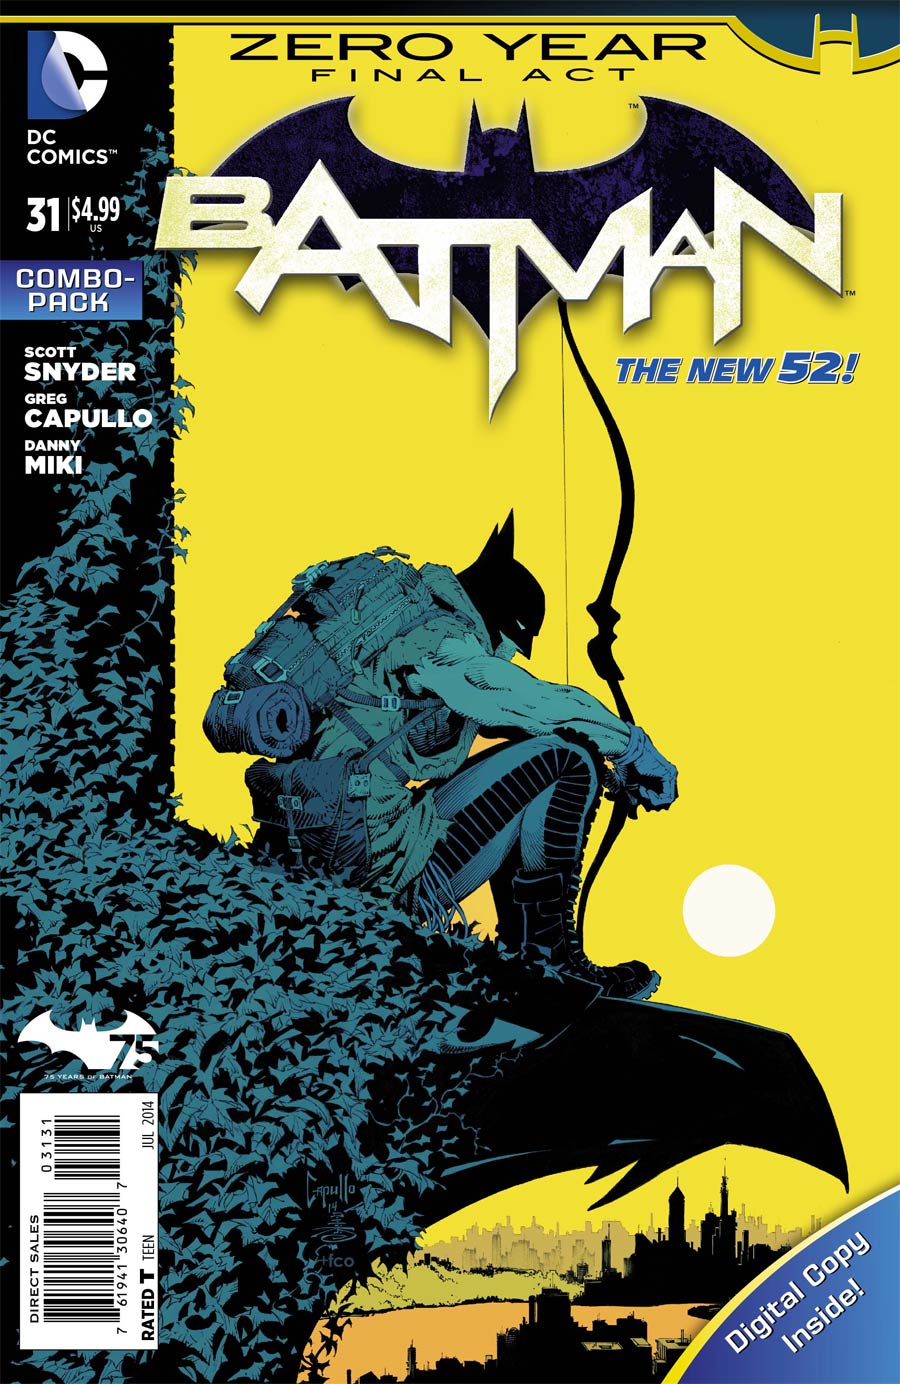 Batman Vol 2 #31 Cover C Combo Pack Without Polybag (Zero Year Tie-In)